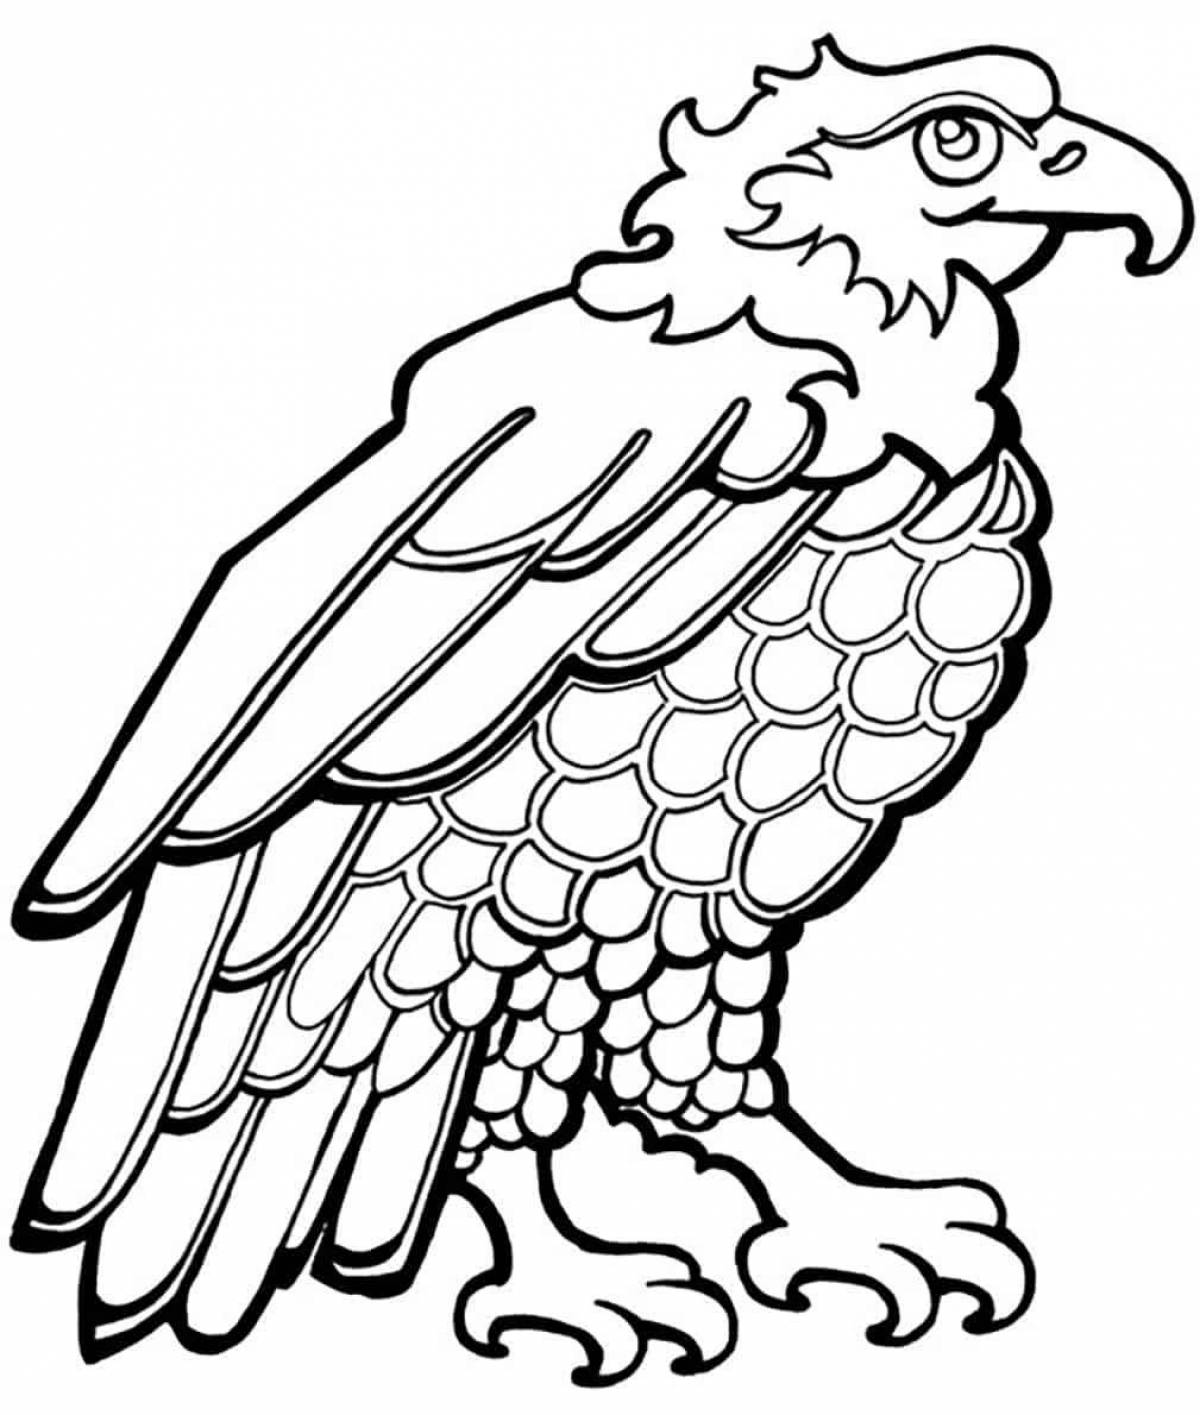 Fat eaglet coloring page